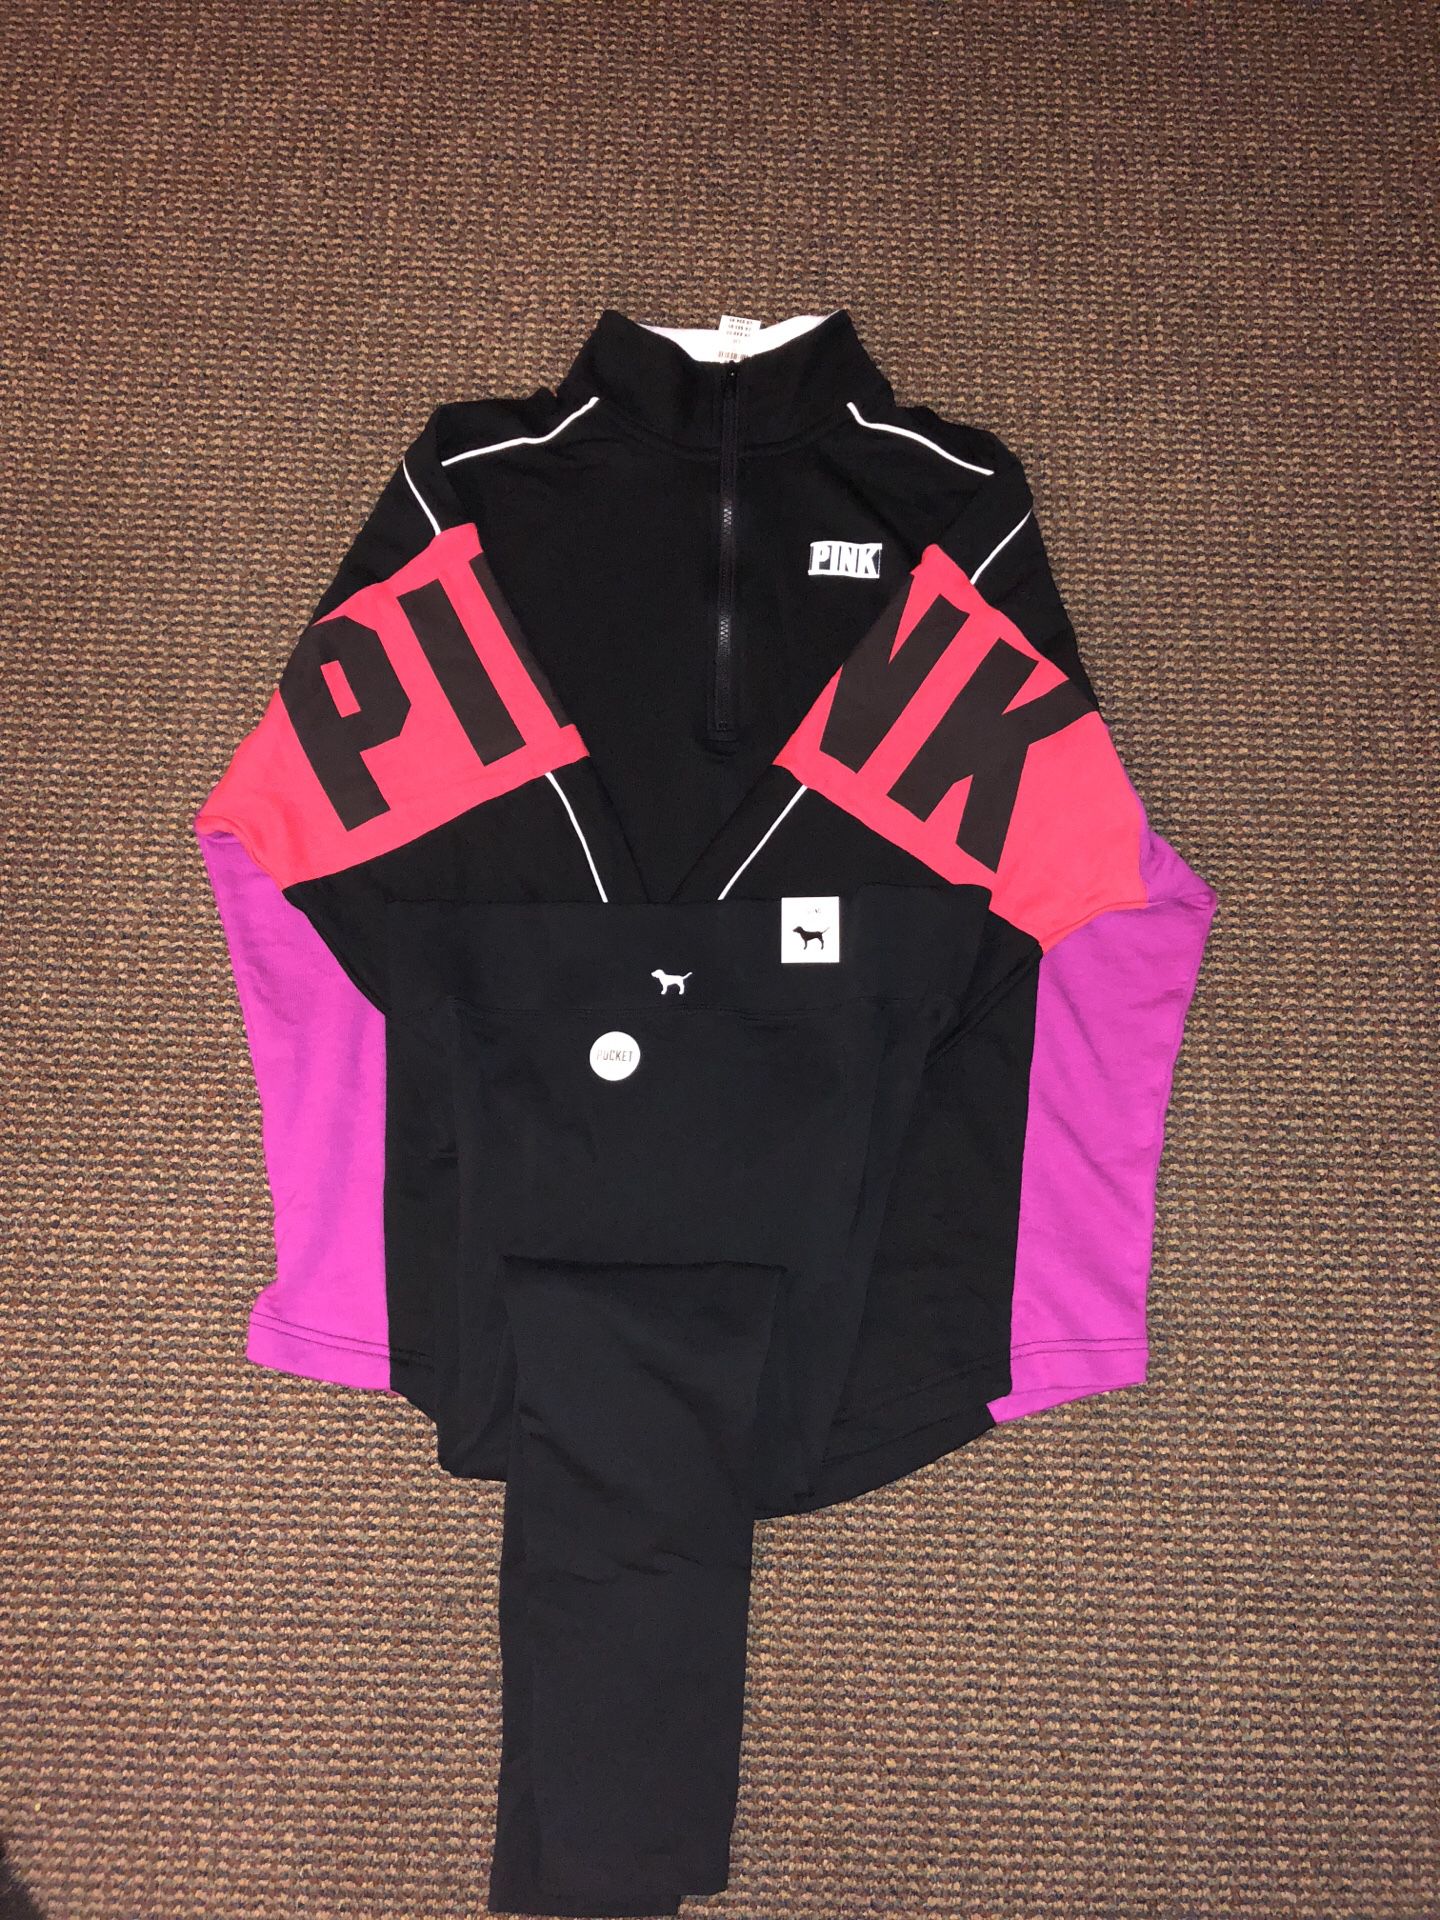 Large Pink outfit $65